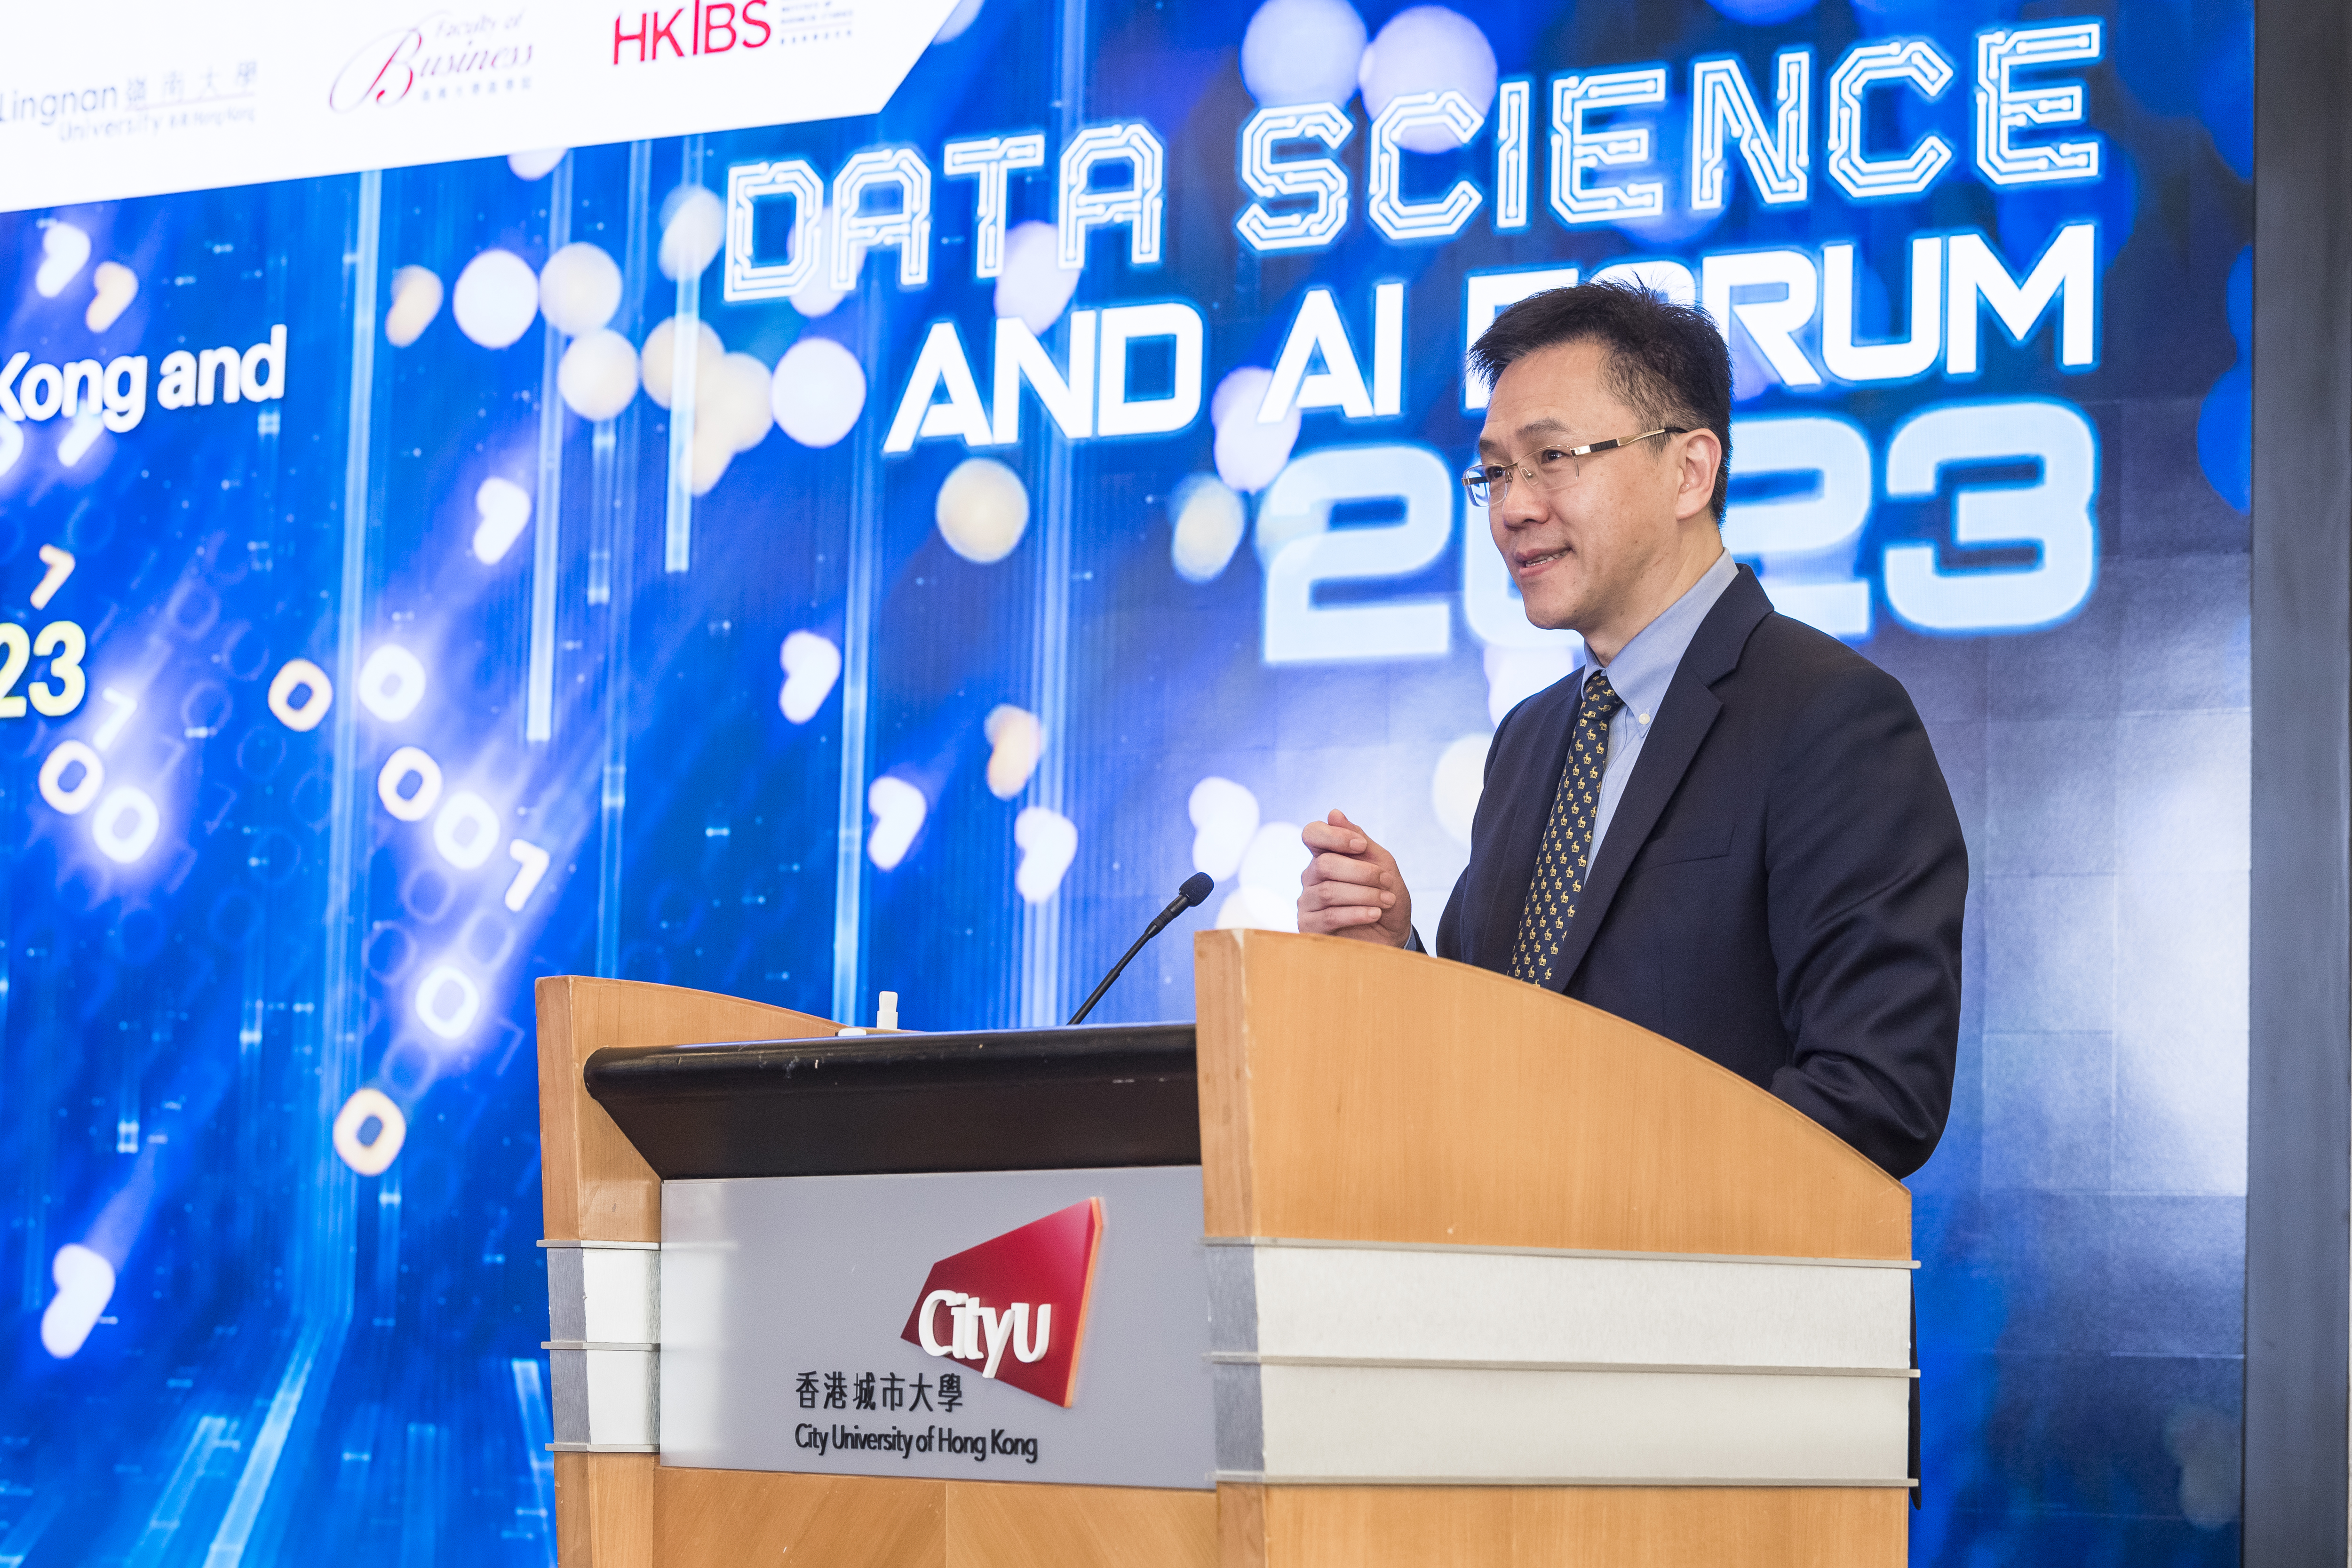 Professor Sun said that any measures taken about AI must encourage innovation and creativity to nurture a better world.